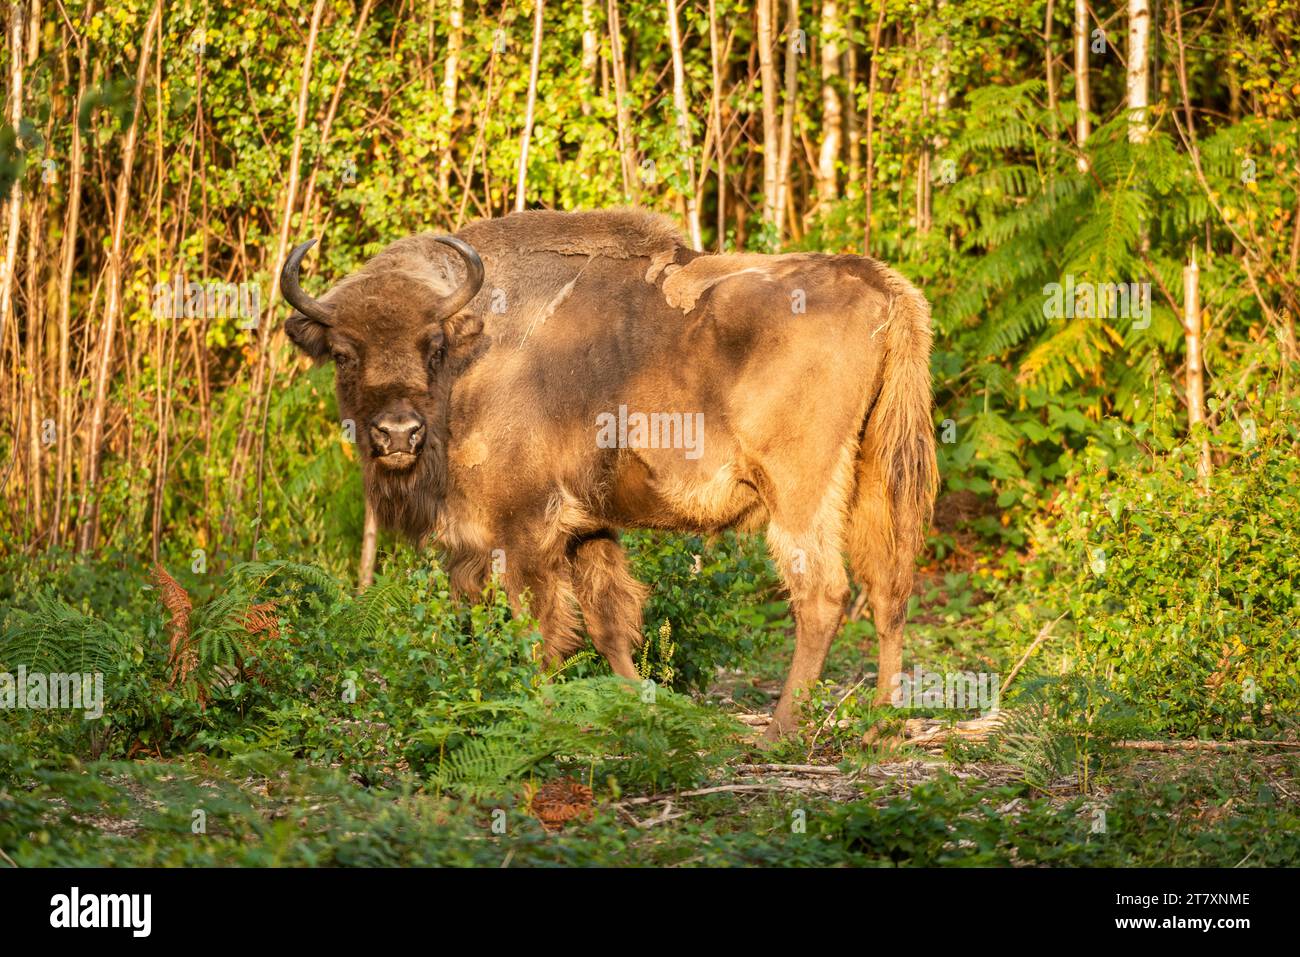 European Bison (Bison bonasus), female (cow), being released into woodland as part of the Wilder Blean project, Kent, England, United Kingdom, Europe Stock Photo